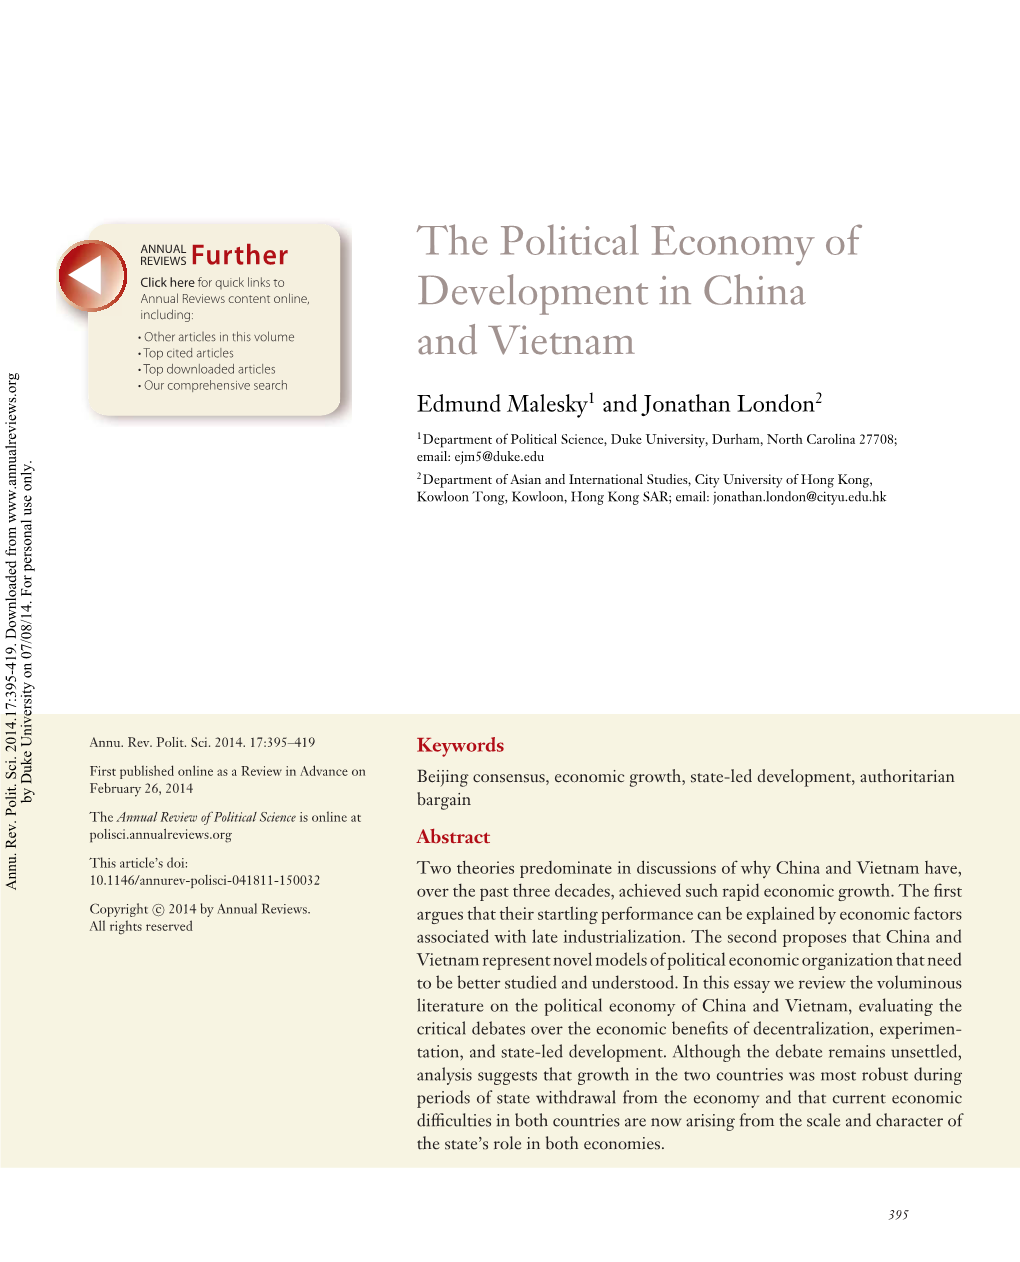 The Political Economy of Development in China and Vietnam